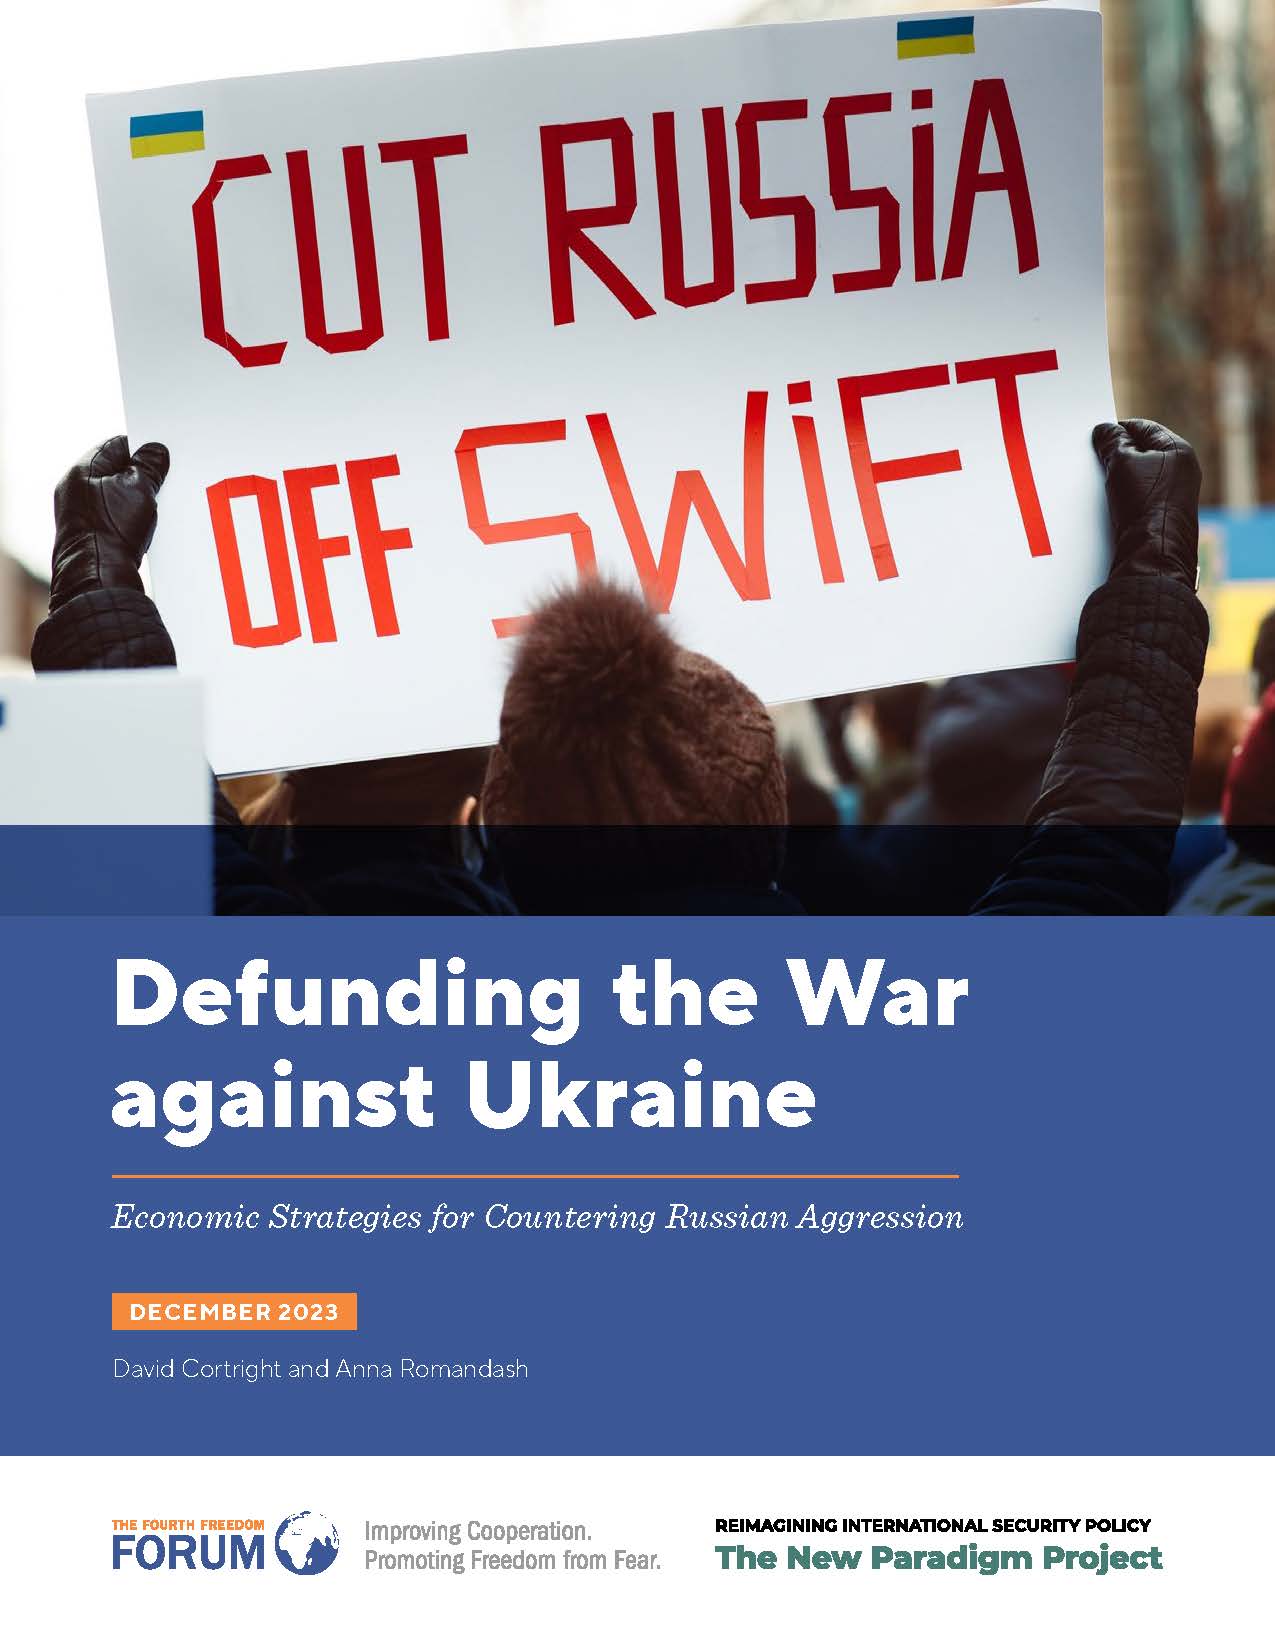 Defunding the War Against Ukraine: Economic Strategies for Countering Russian Aggression